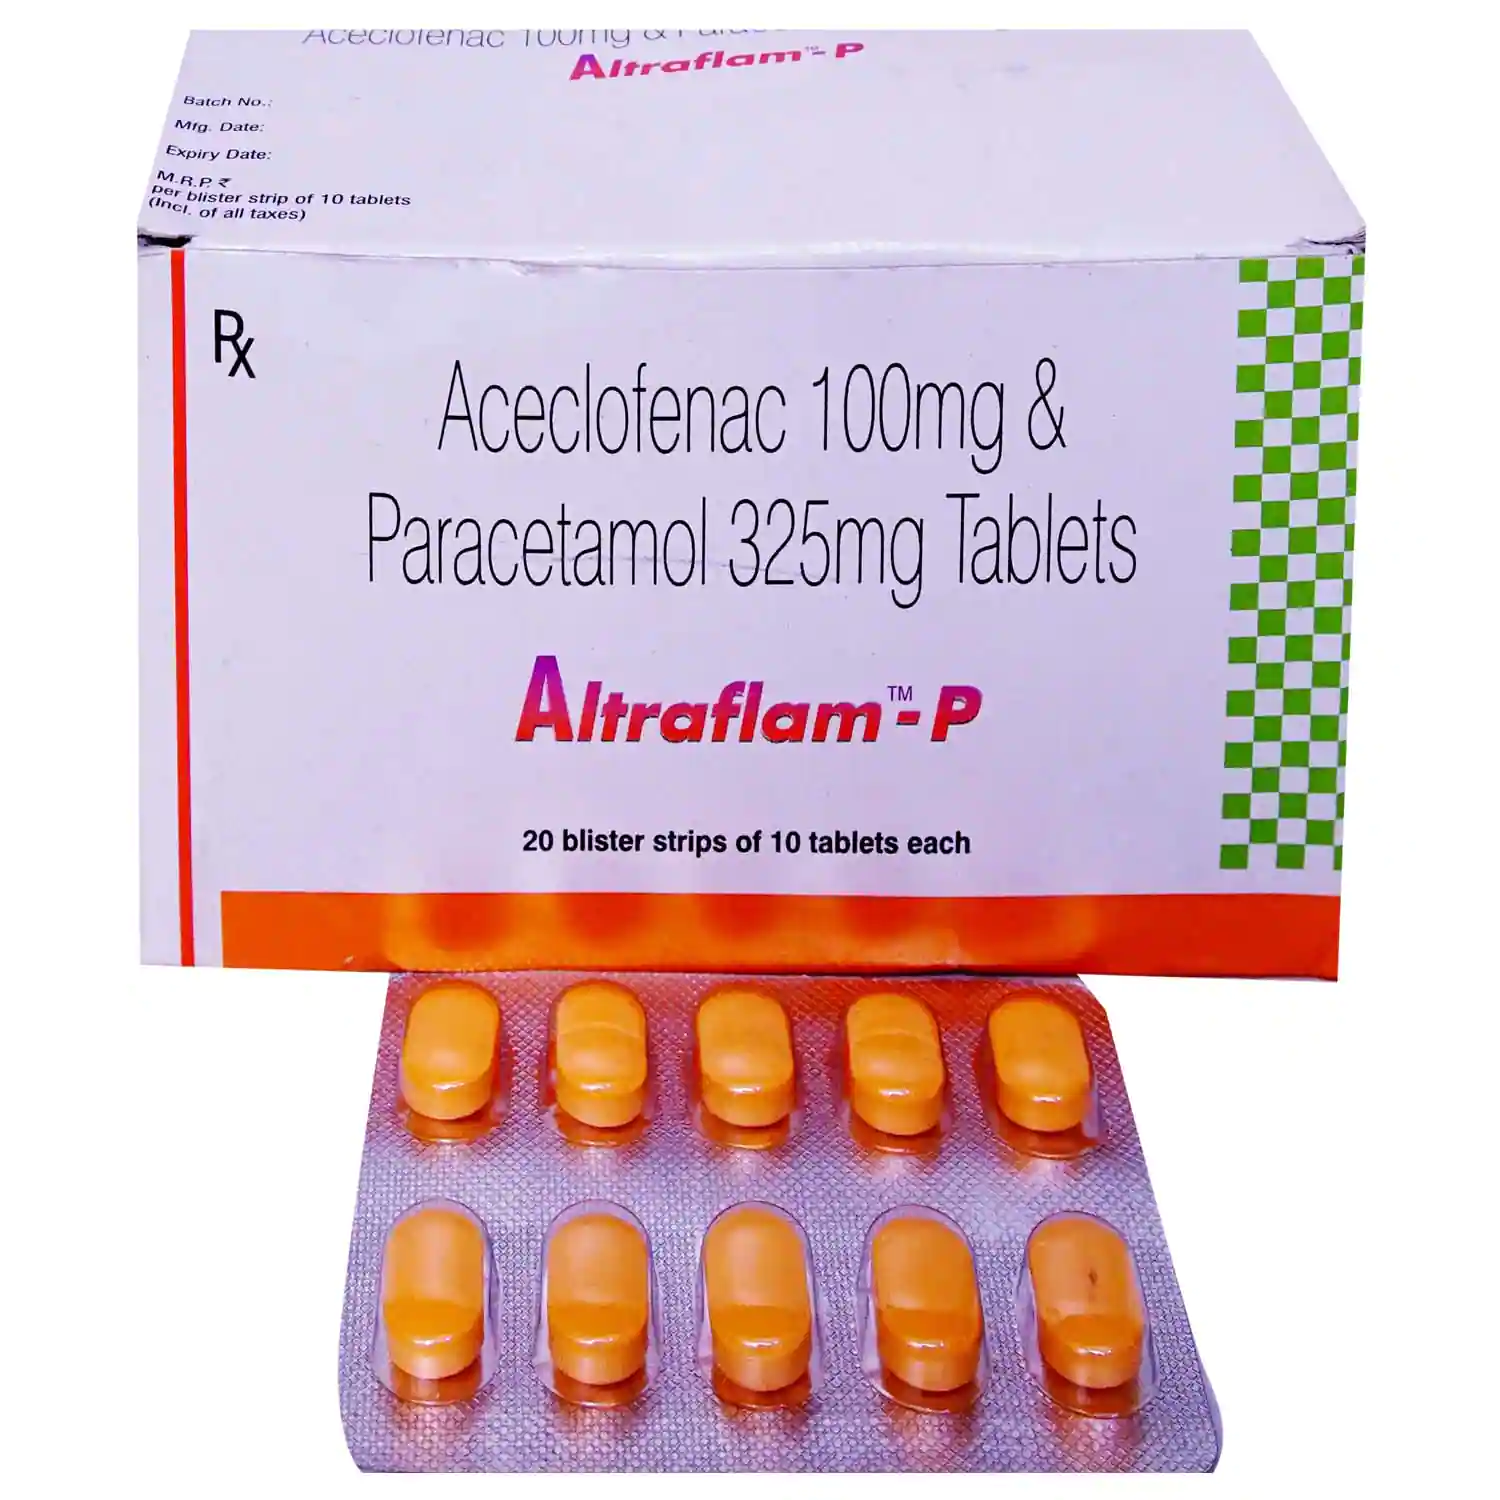 Acemiz S Strip Of 10 Tablets: Uses, Side Effects, Price & Dosage